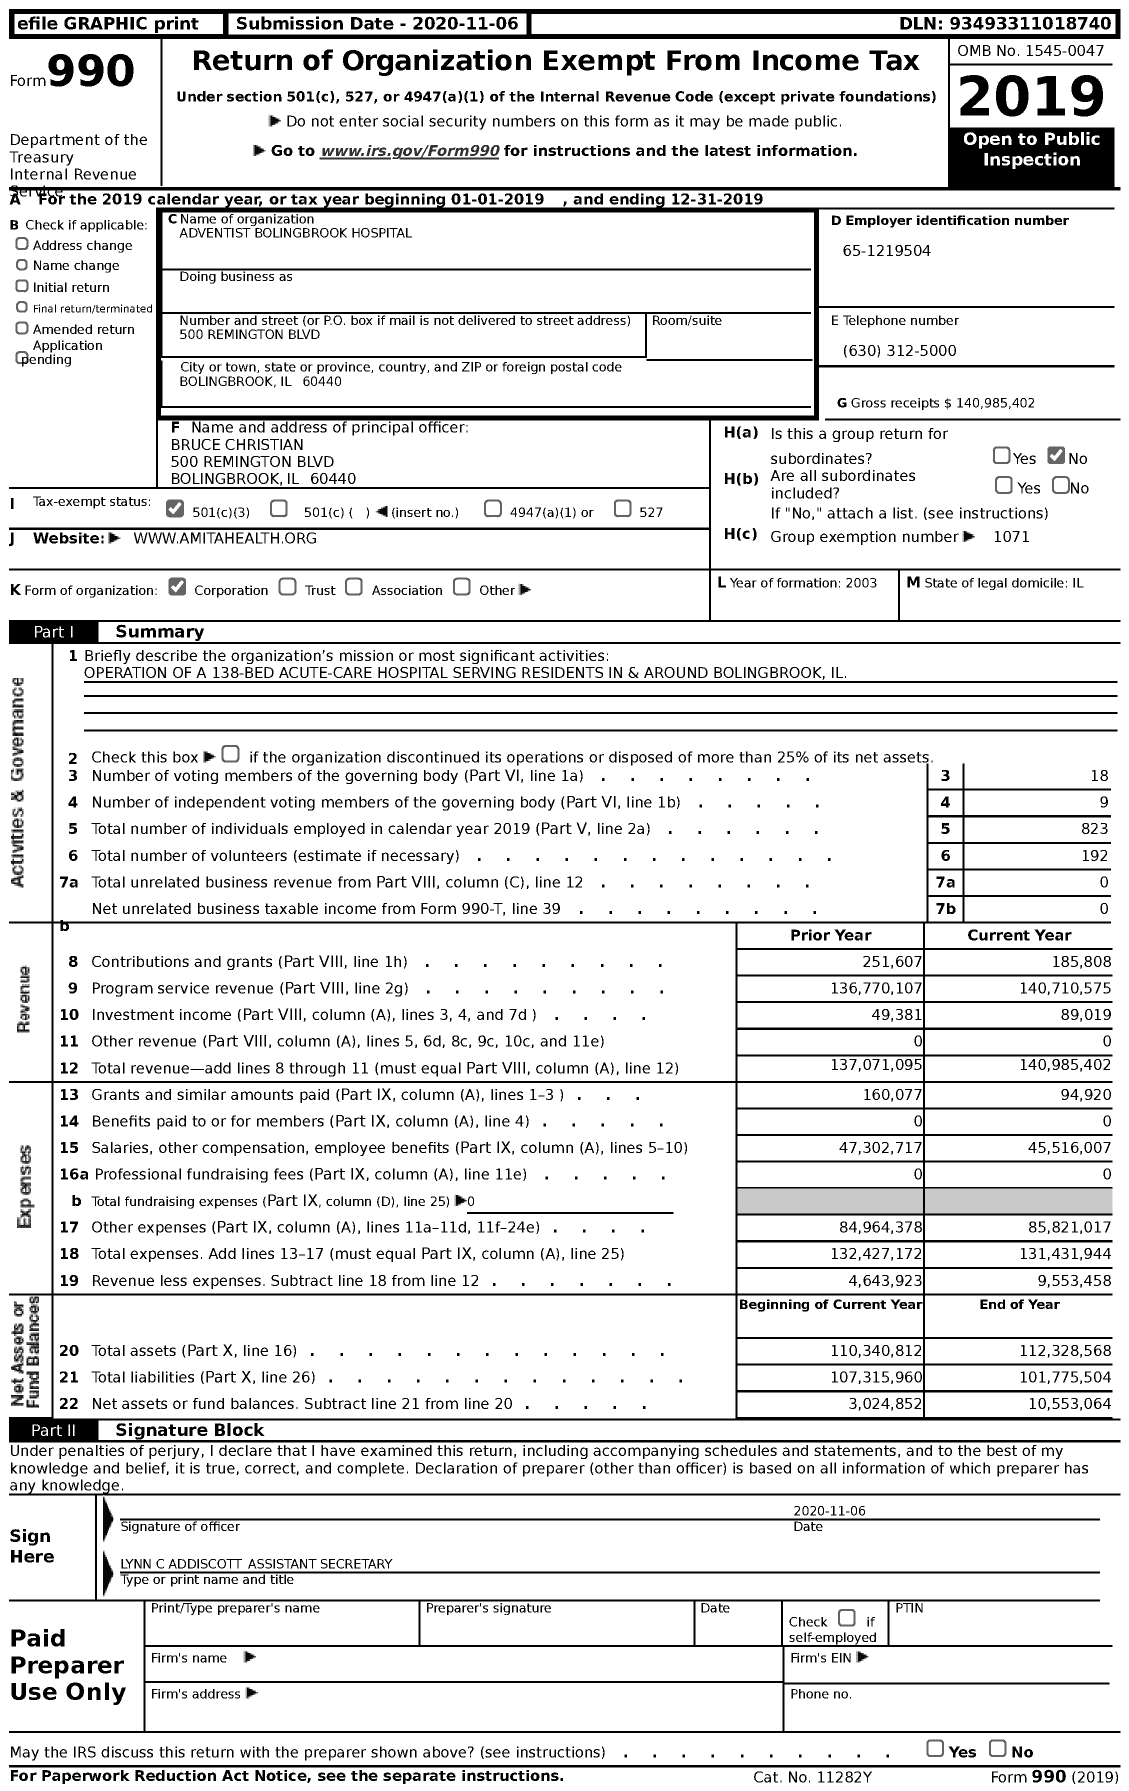 Image of first page of 2019 Form 990 for Adventist Bolingbrook Hospital (ABH)